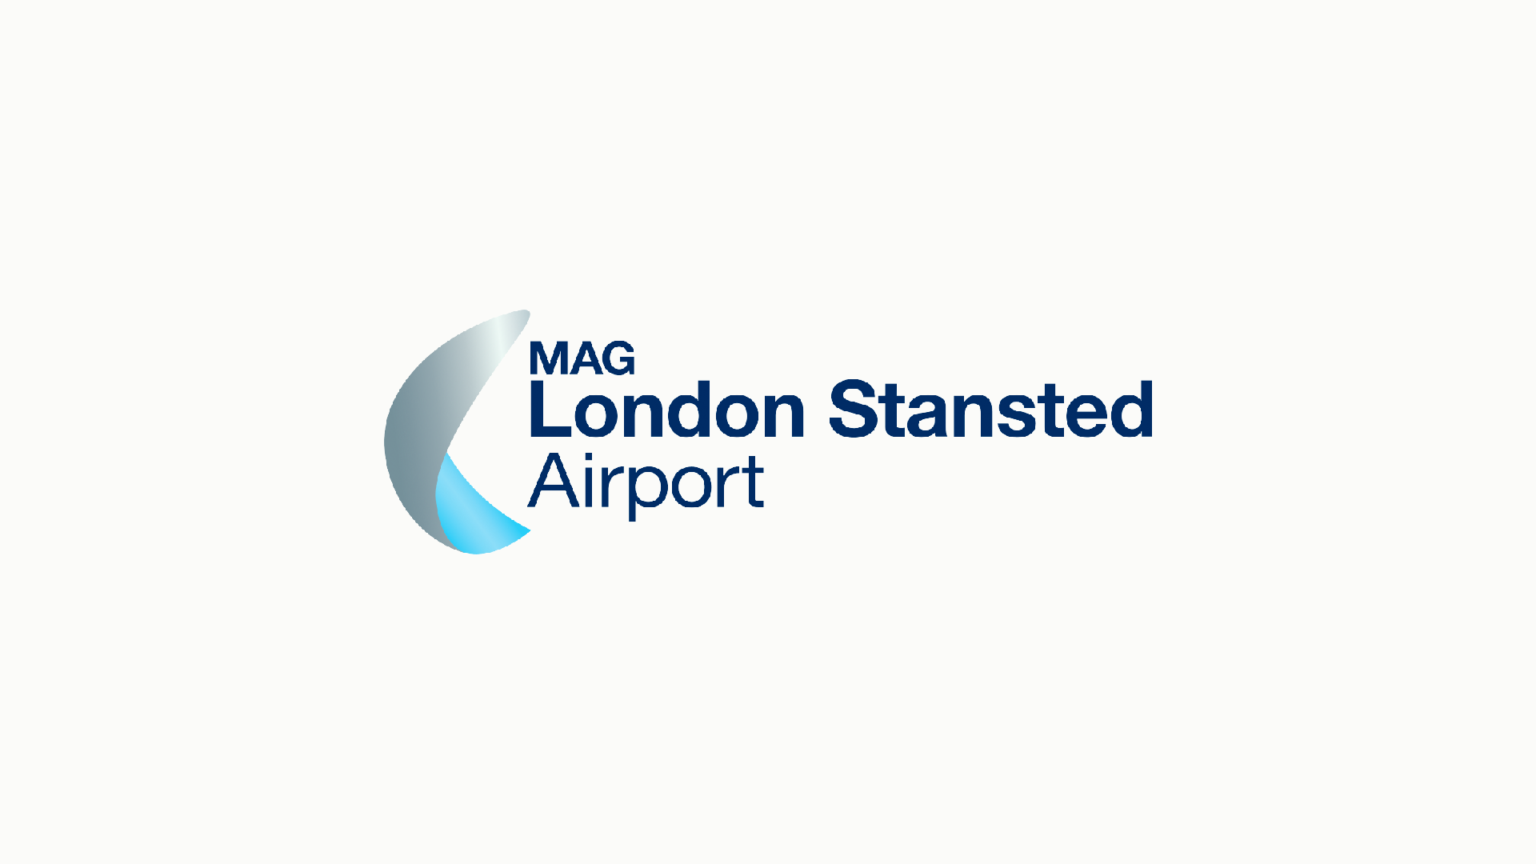 Stansted Airport Logo